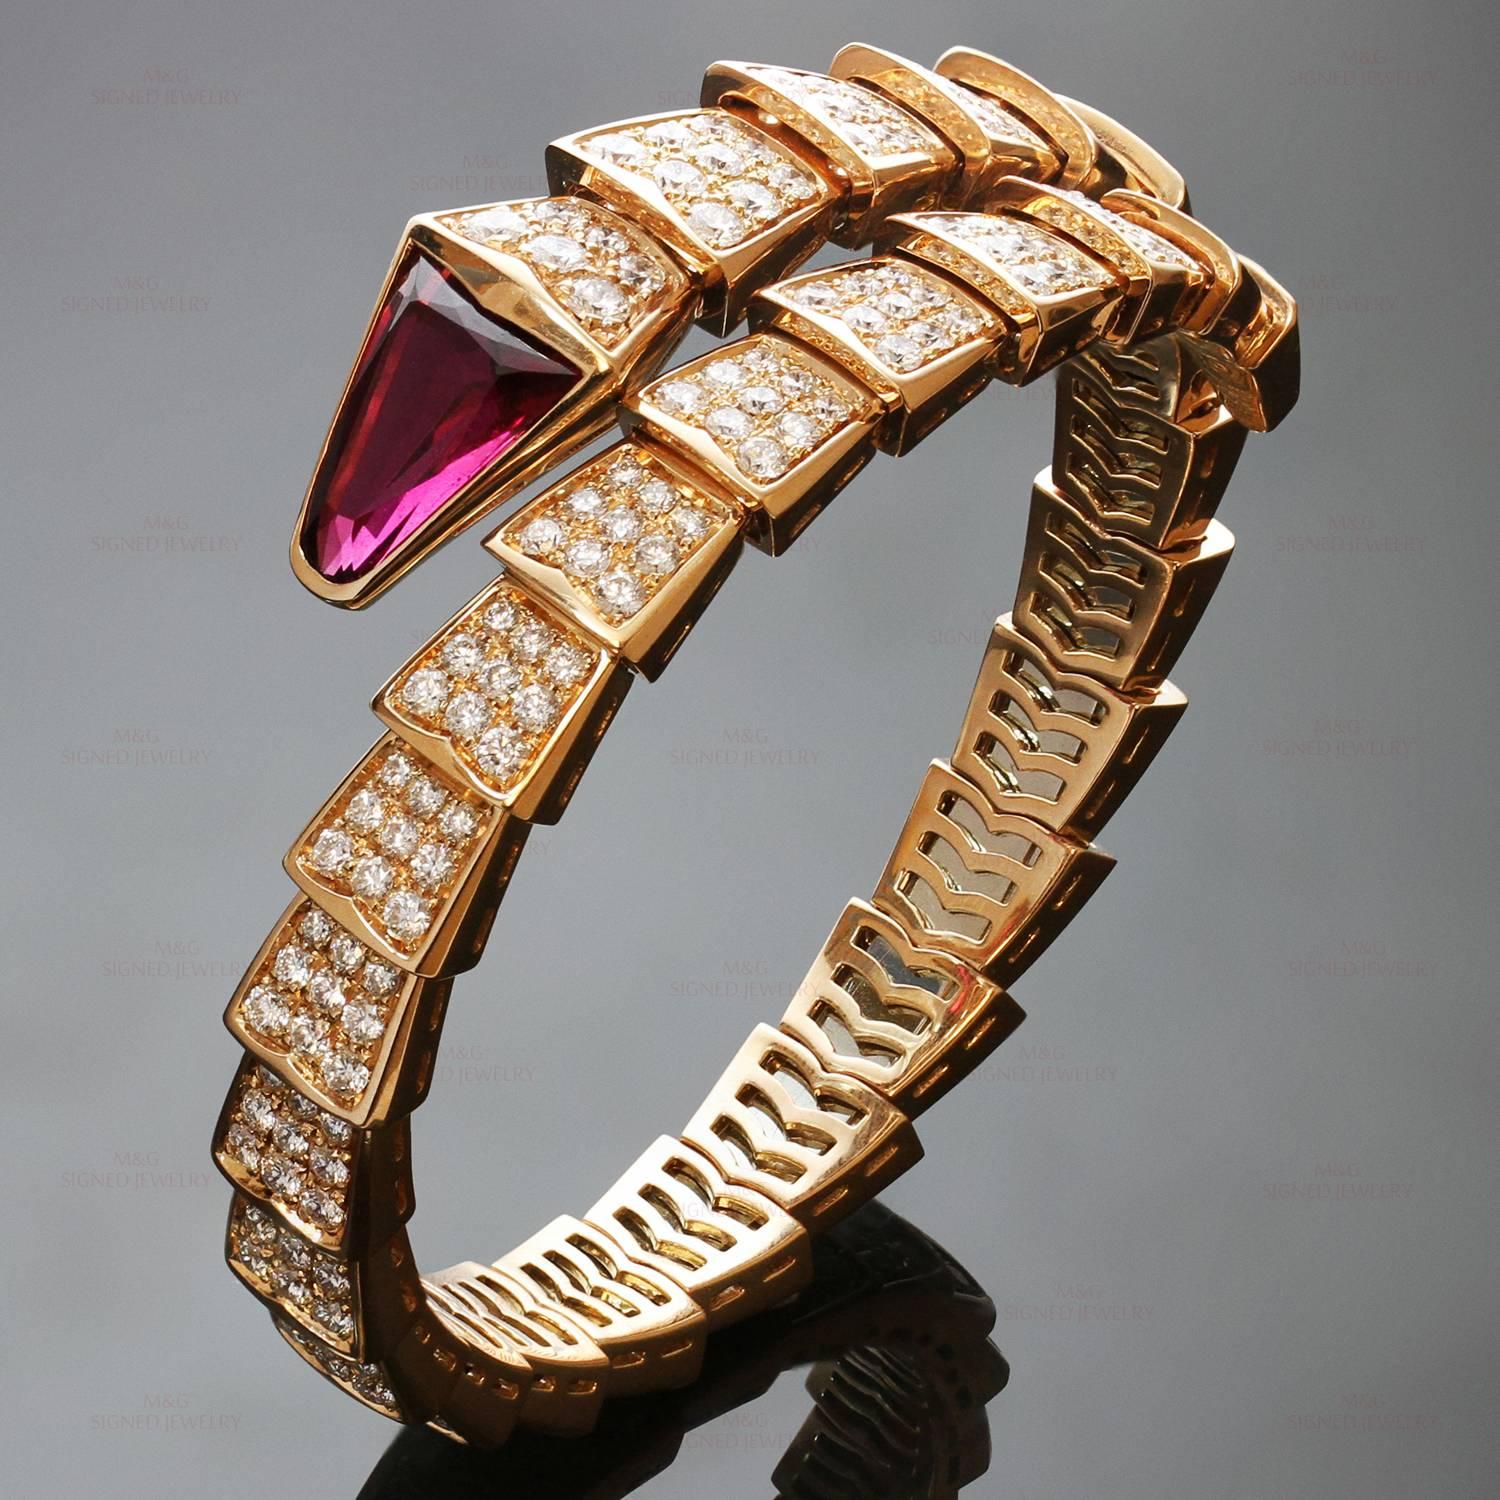 This elegant bracelet from Bulgari's Serpenti collection is crafted in 18k rose and set with a faceted rubellite stone and sparkling pave diamonds. Will fit a large wrist size of 7.5